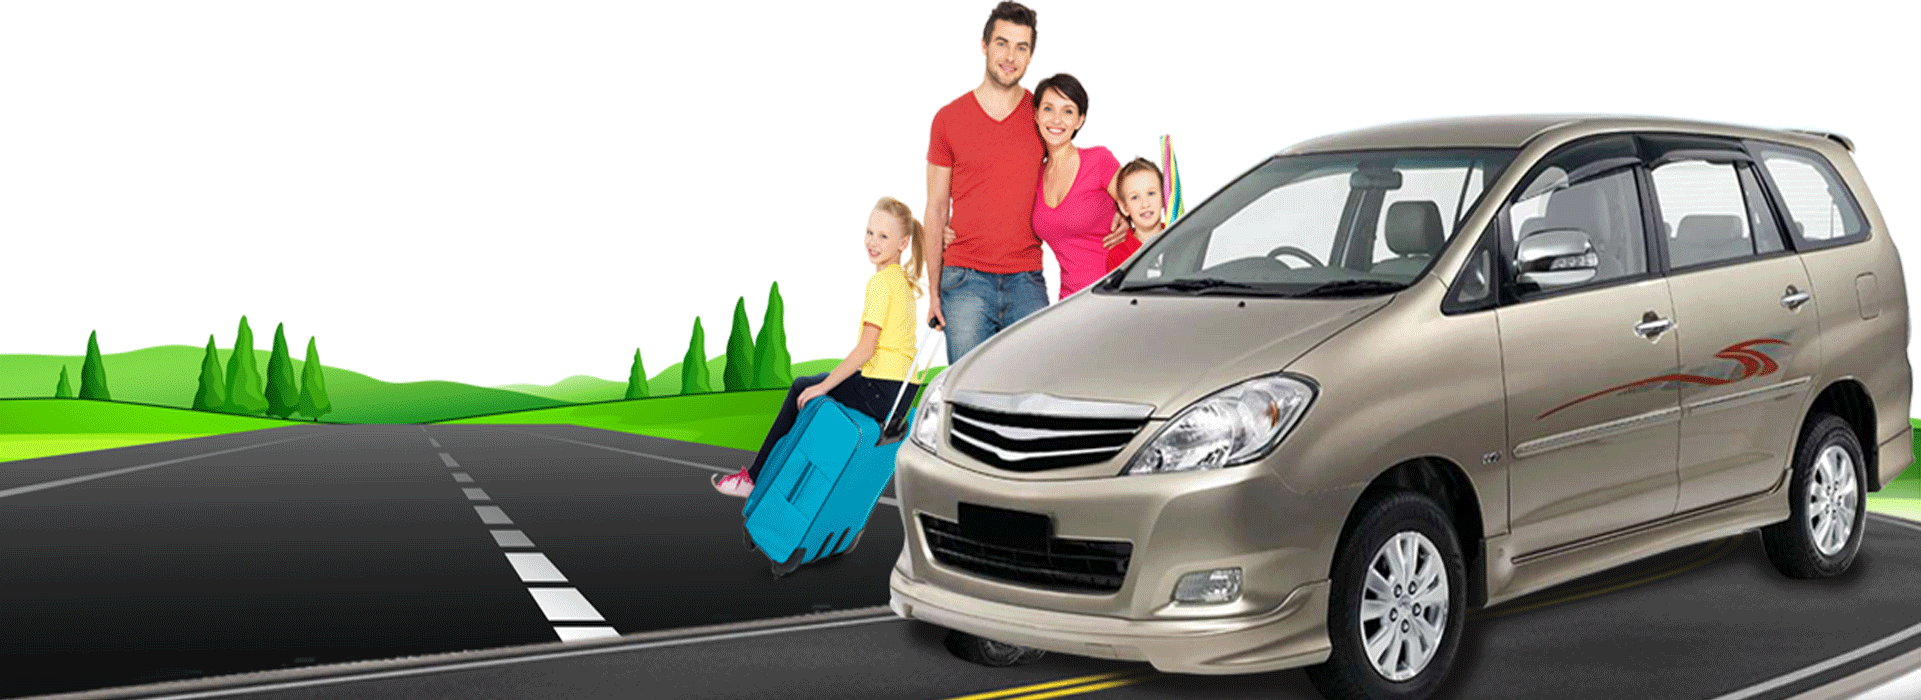 Are you looking for affordable taxi service